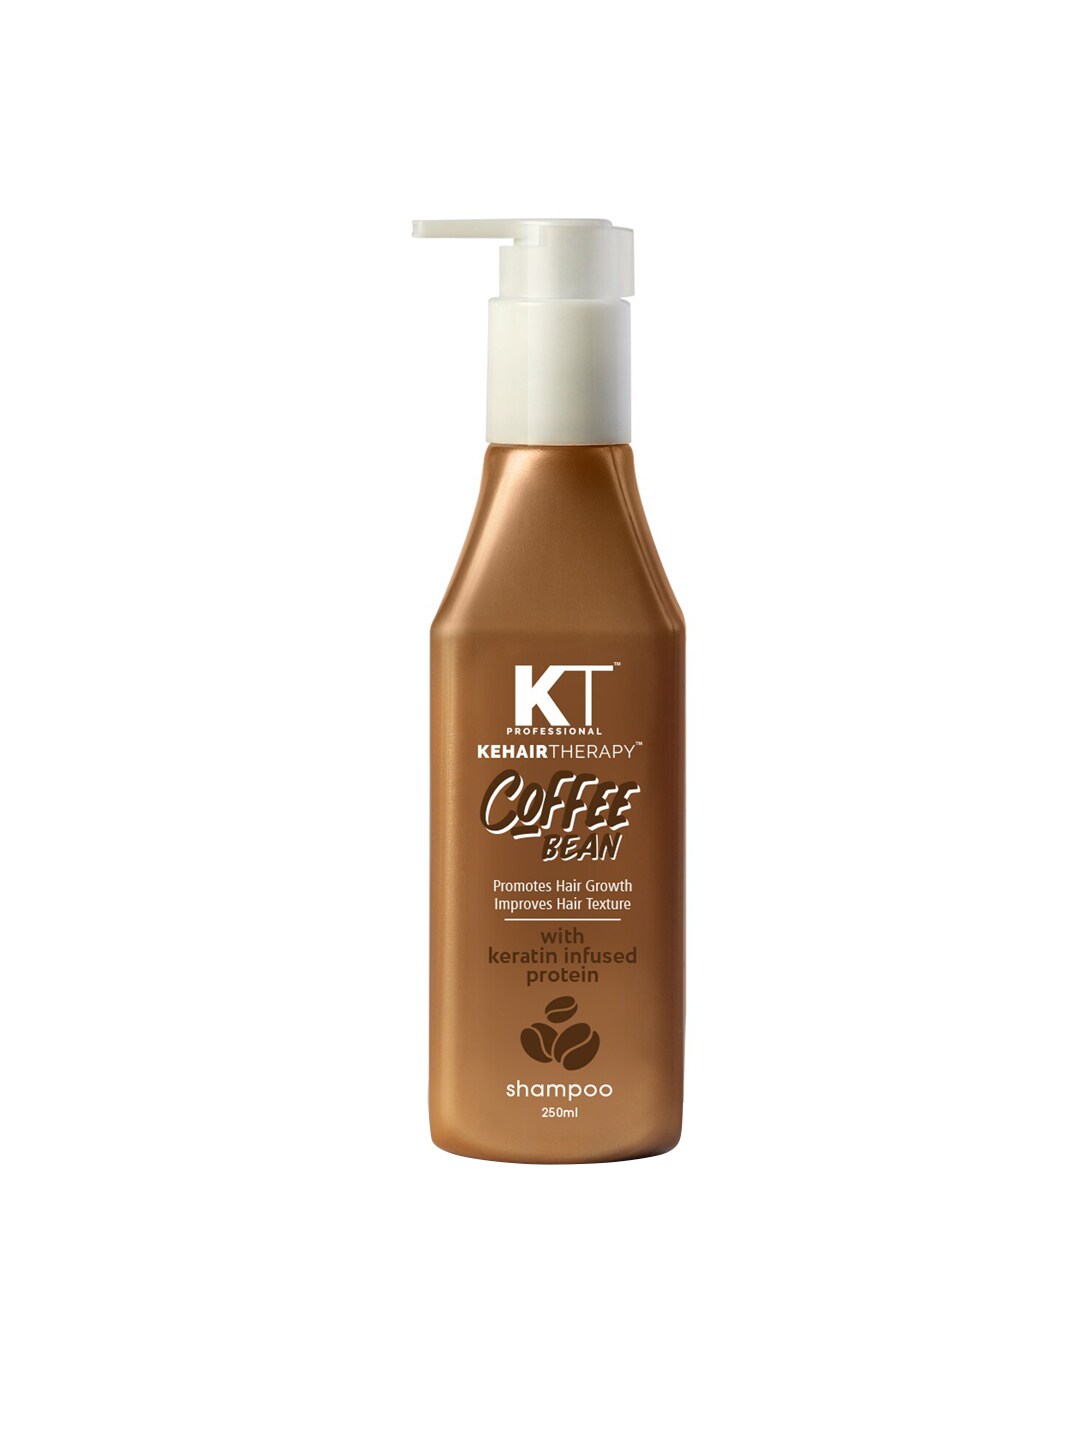 KEHAIRTHERAPY KT Professional Coffee Bean With Keratin Infused Protein Shampoo - 250 ml Price in India